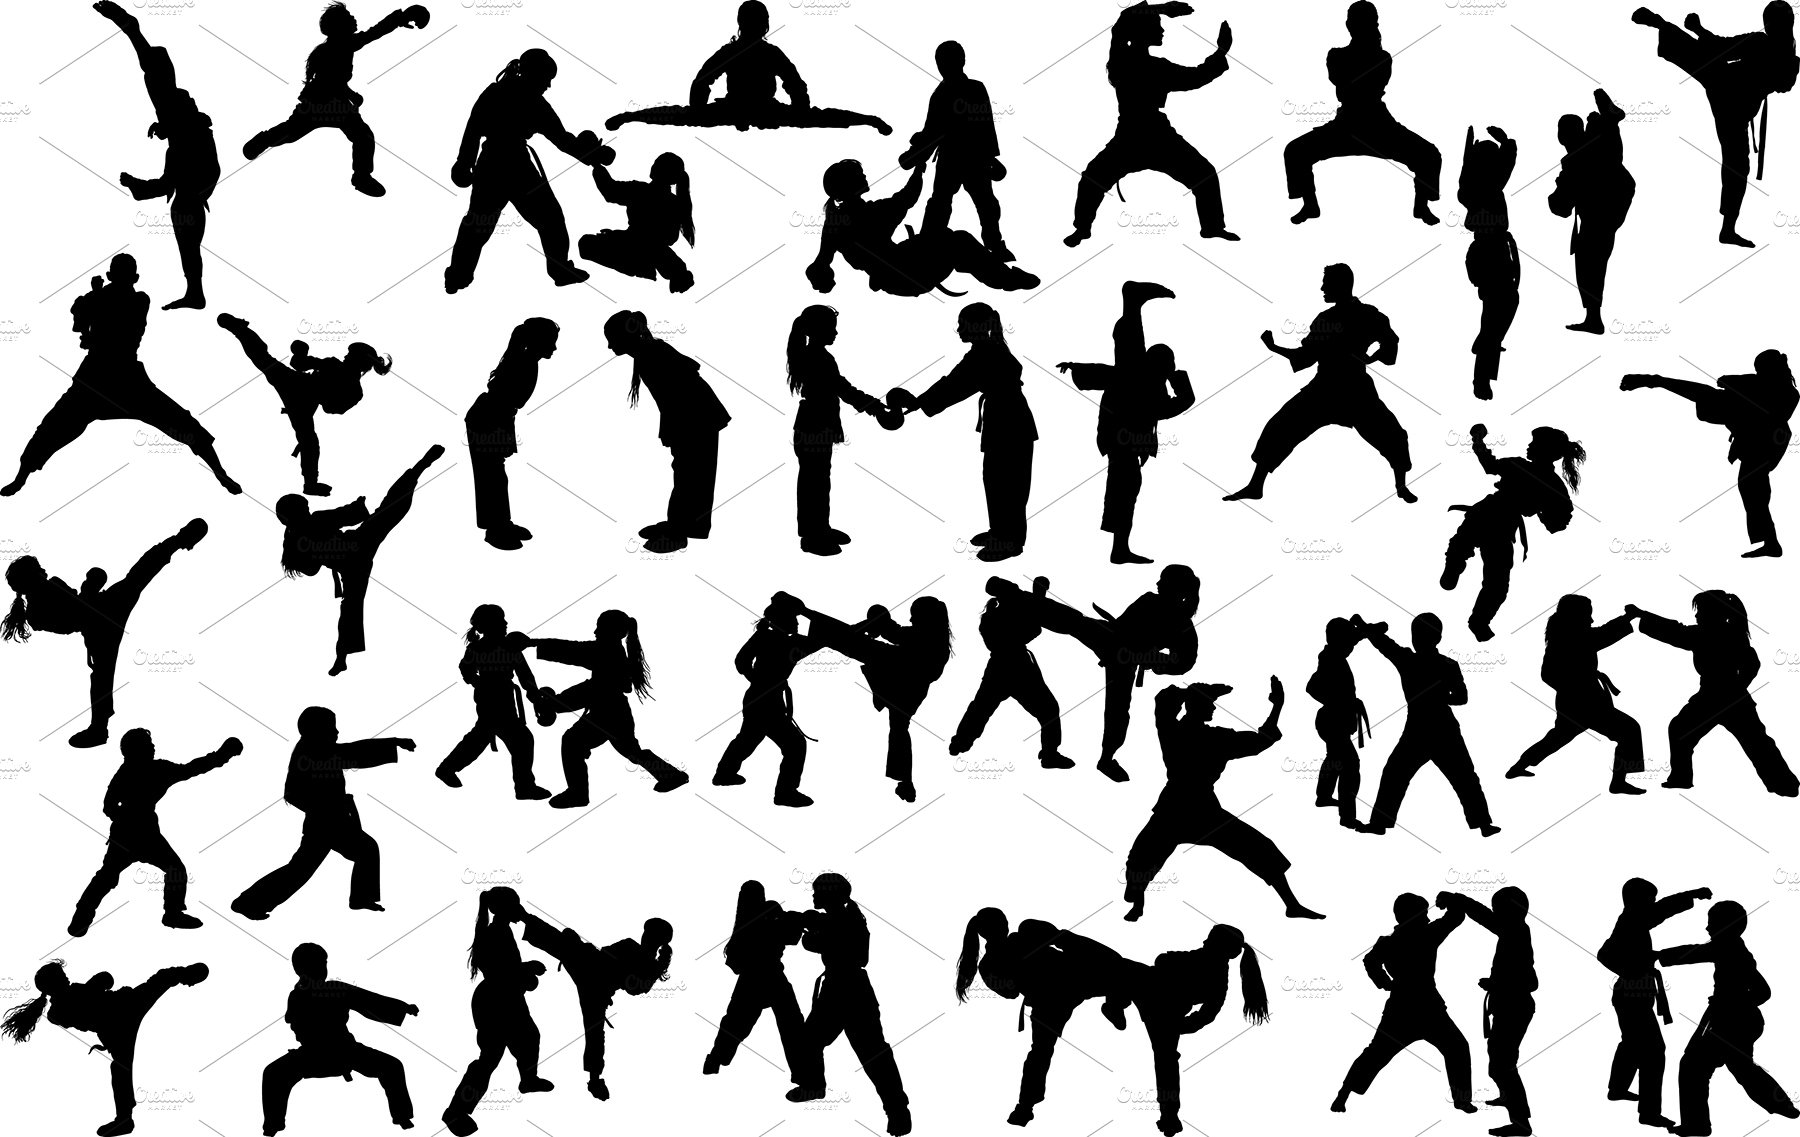 karate silhouettes set cover image.